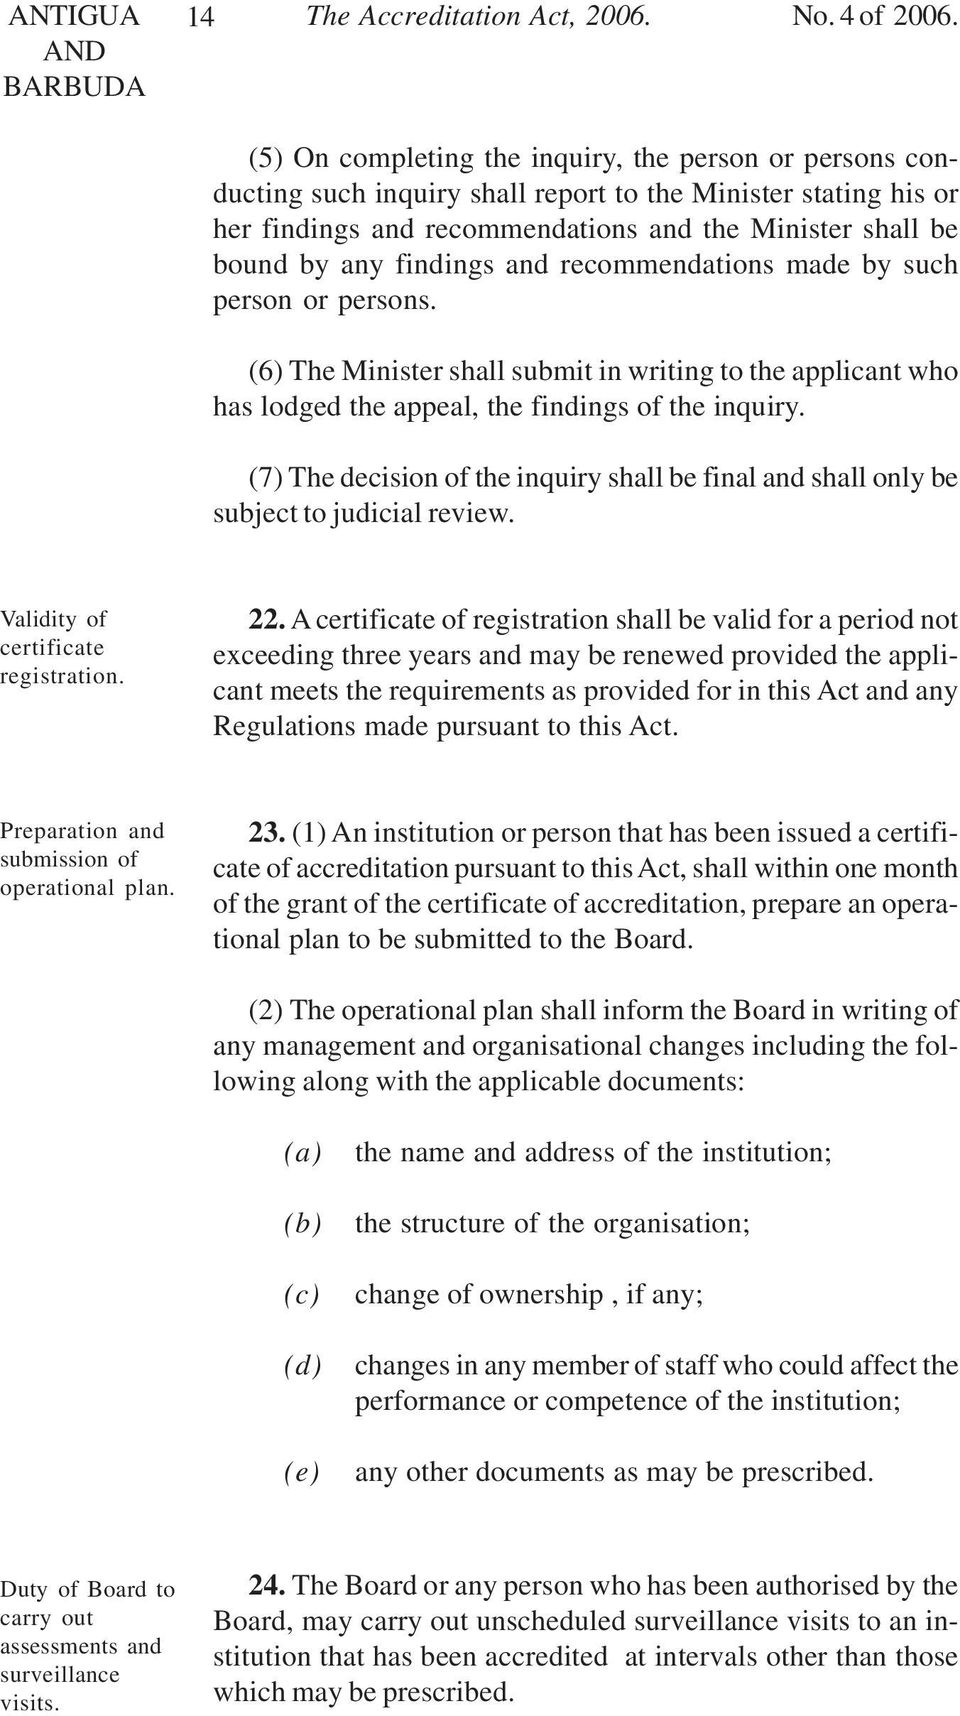 findings and recommendations made by such person or persons. (6) The Minister shall submit in writing to the applicant who has lodged the appeal, the findings of the inquiry.